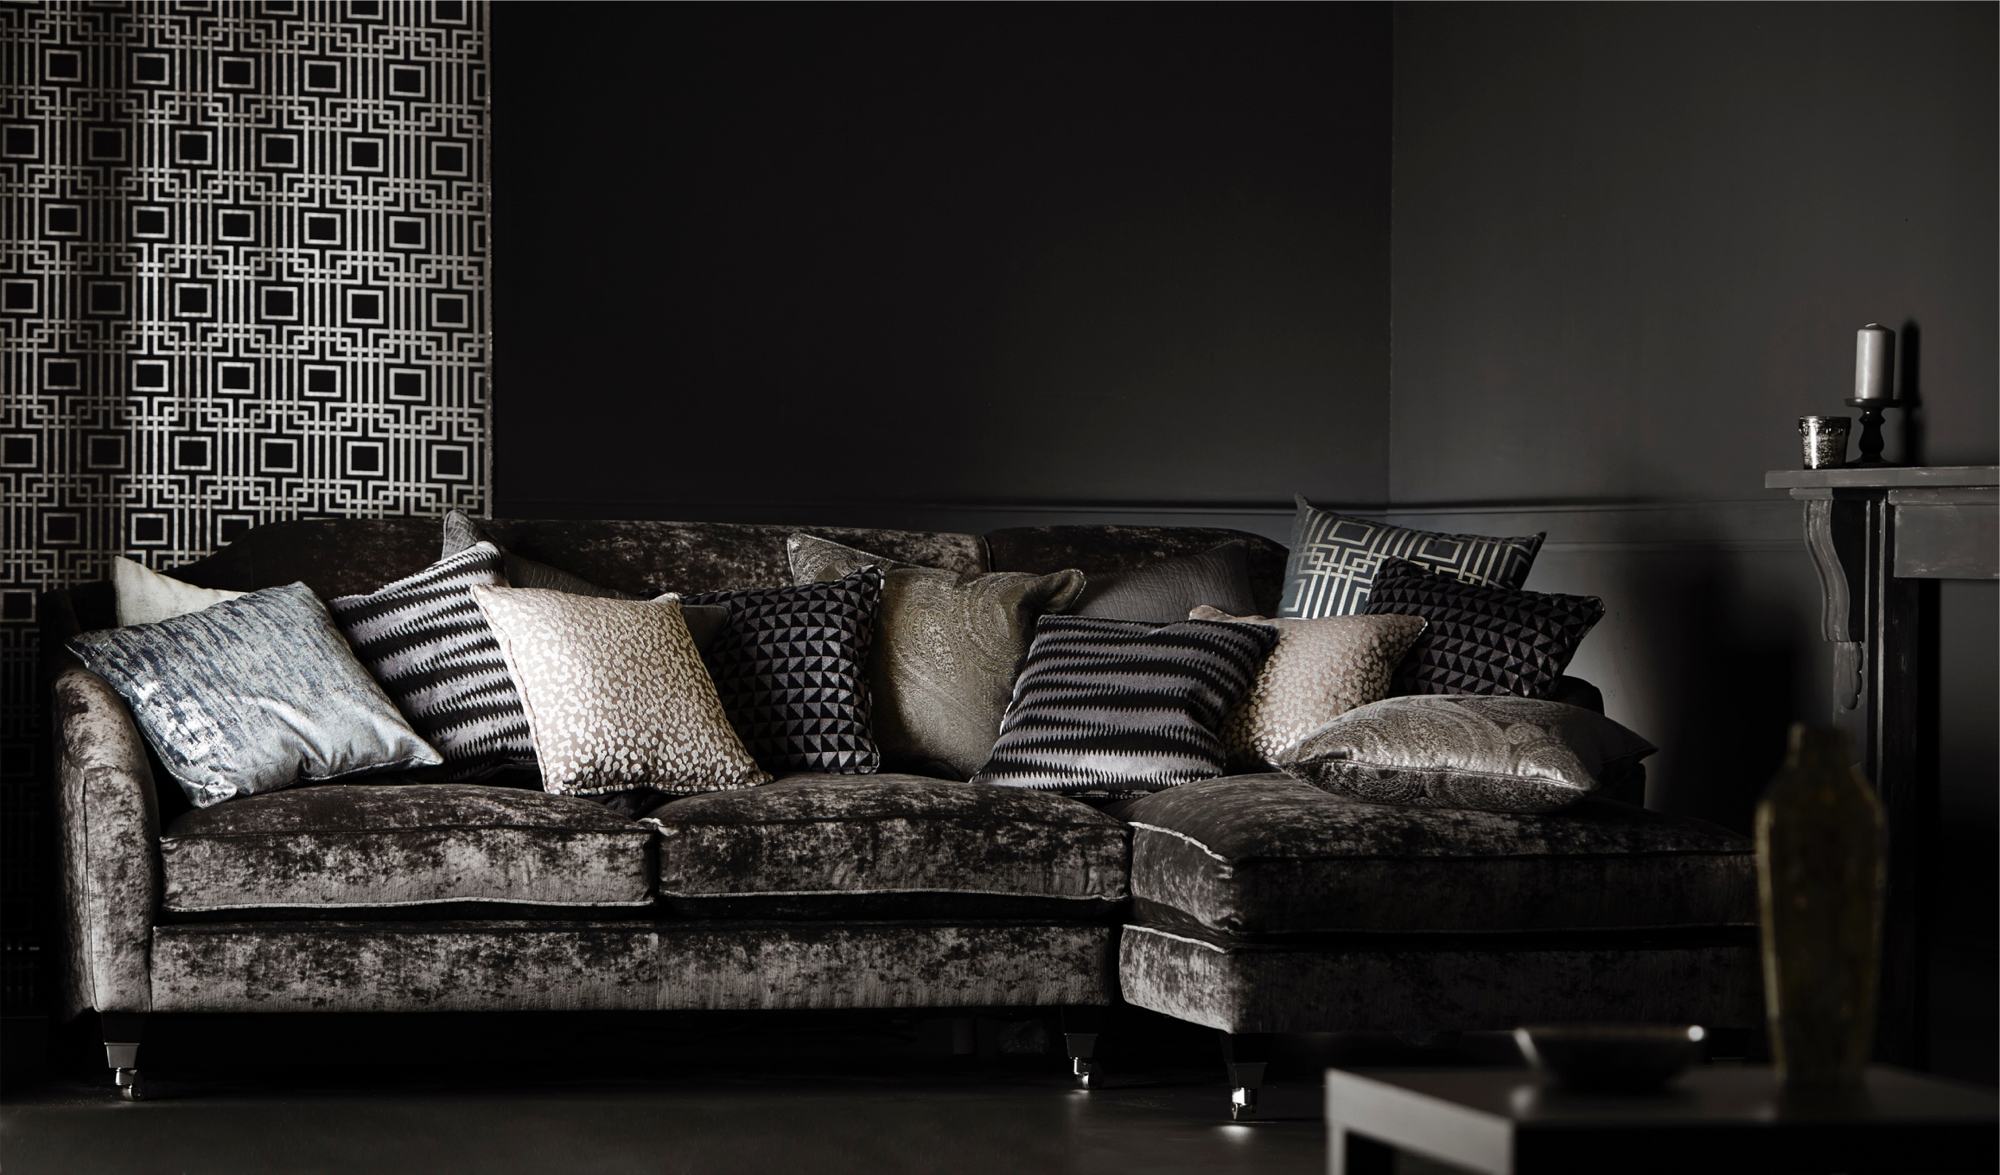 Bespoke sofas and chairs, designed in house and handcrafted to any length, depth, or height you require, with luxurious fabrics in classic or contemporary styles from Interior Mood, County Carlow, Ireland